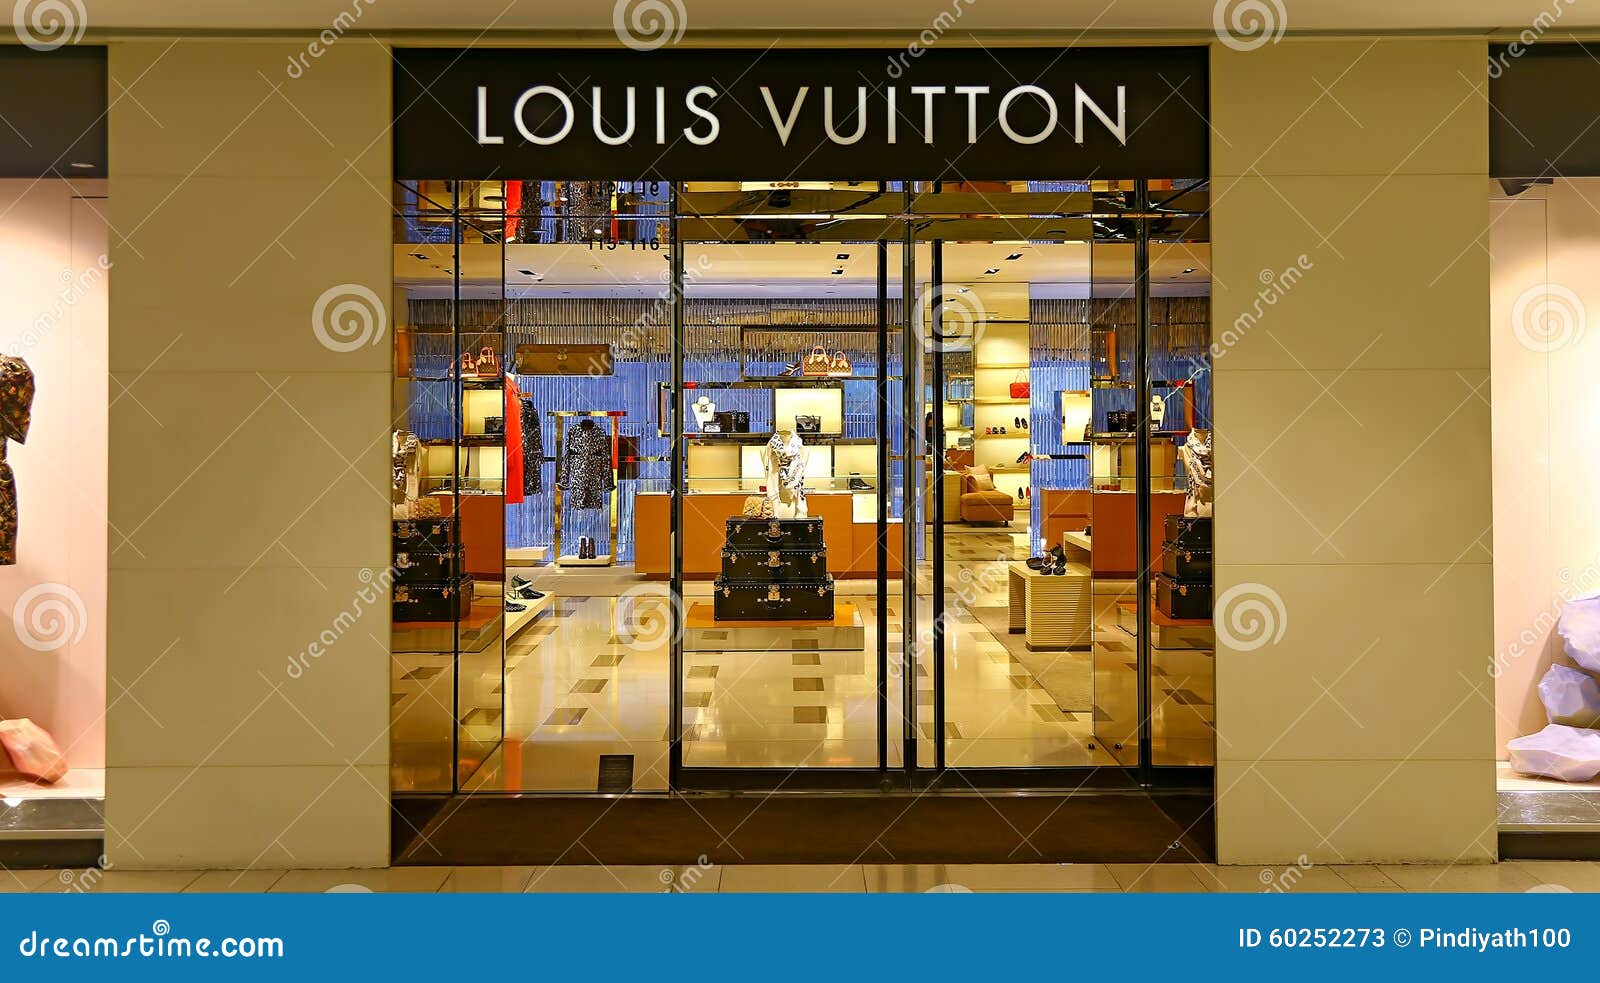 LOUIS VUITTON Alma BB Patent Leather Shoulder Bag Rose Blush - Final S - Louis  Vuitton Reportedly Closing Hong Kong Store Amid Ongoing Protests